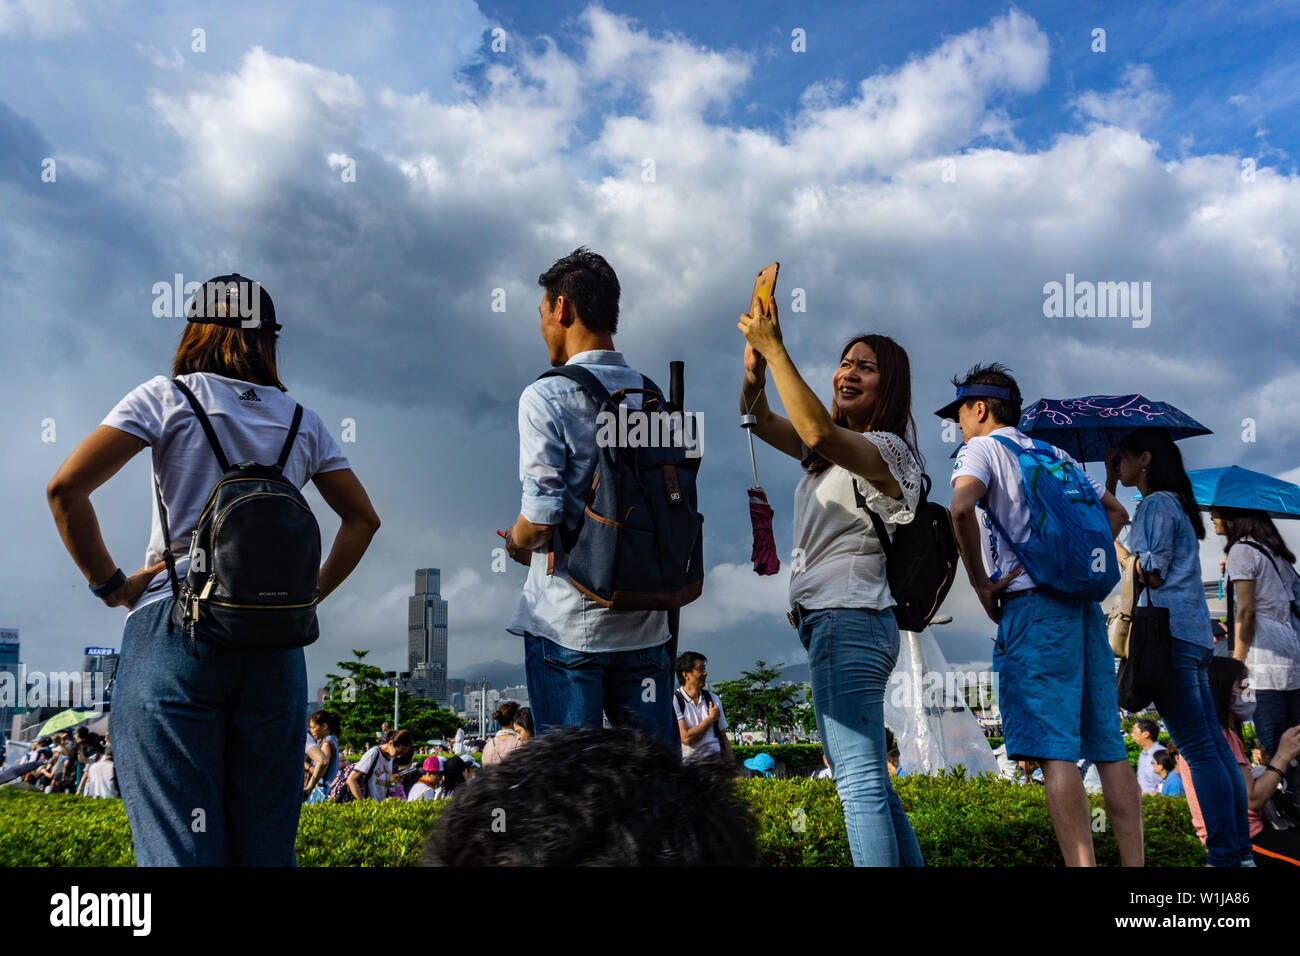 Protest in Hong Kong: counter protest at pro-police rally against anti extradition protesters Stock Photo